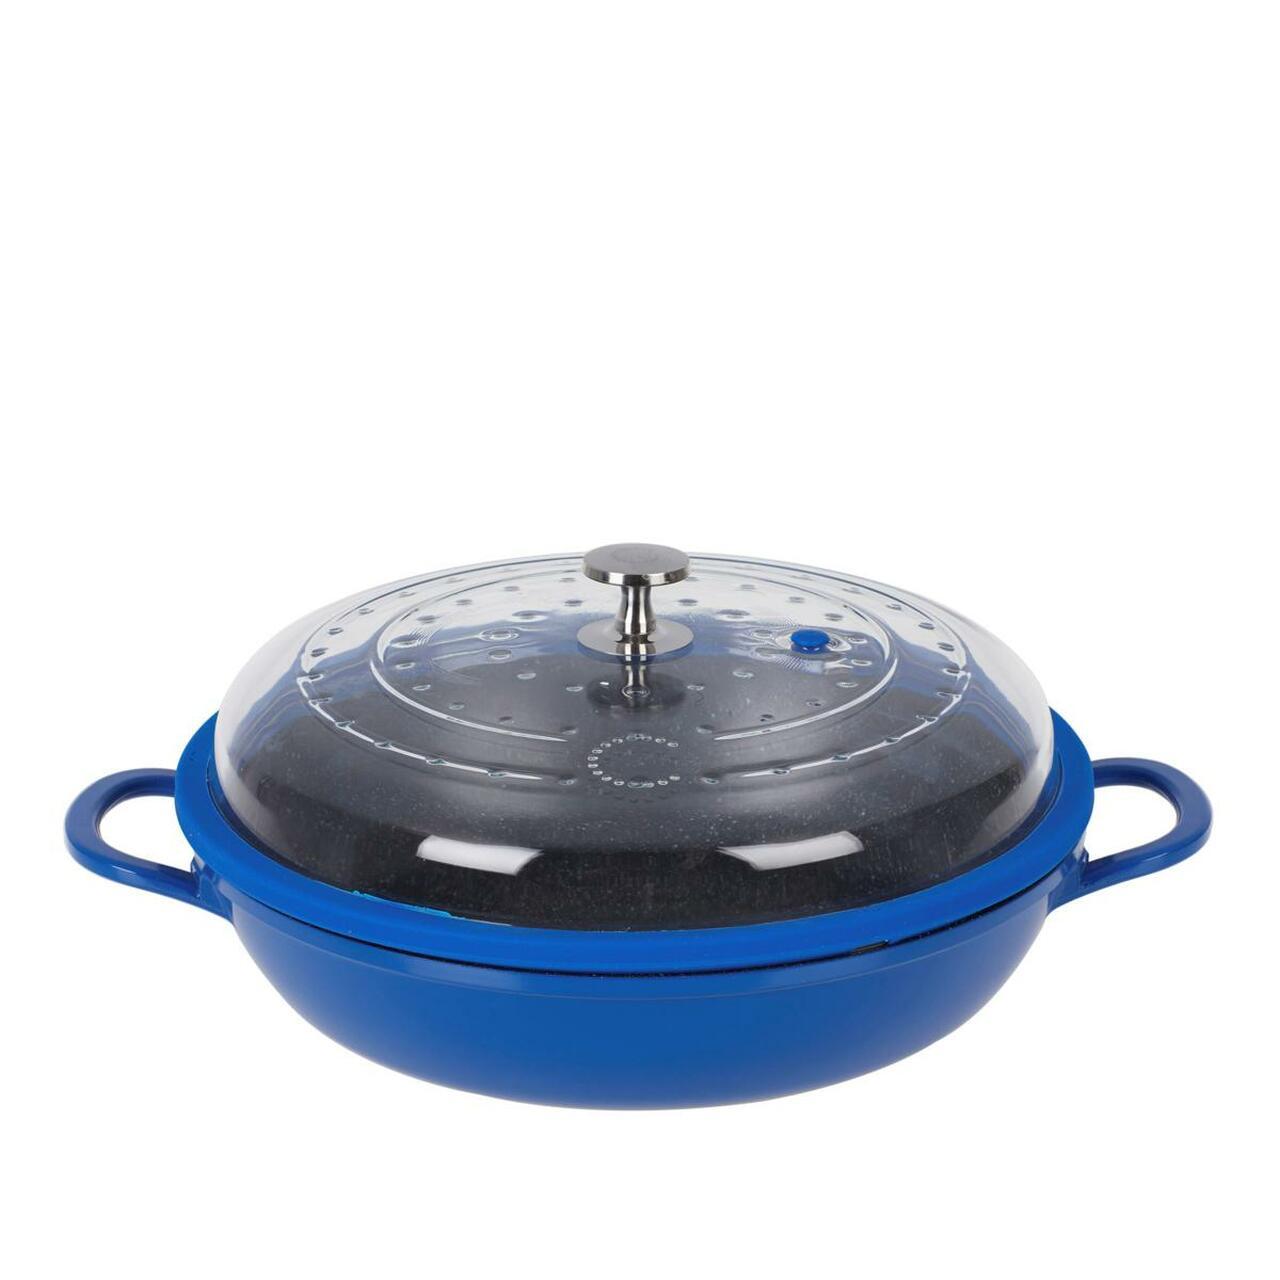 https://dailysale.com/cdn/shop/products/curtis-stone-4-quart-cast-aluminum-pan-with-glass-lid-kitchen-dining-blue-slate-dailysale-299064.jpg?v=1628895658